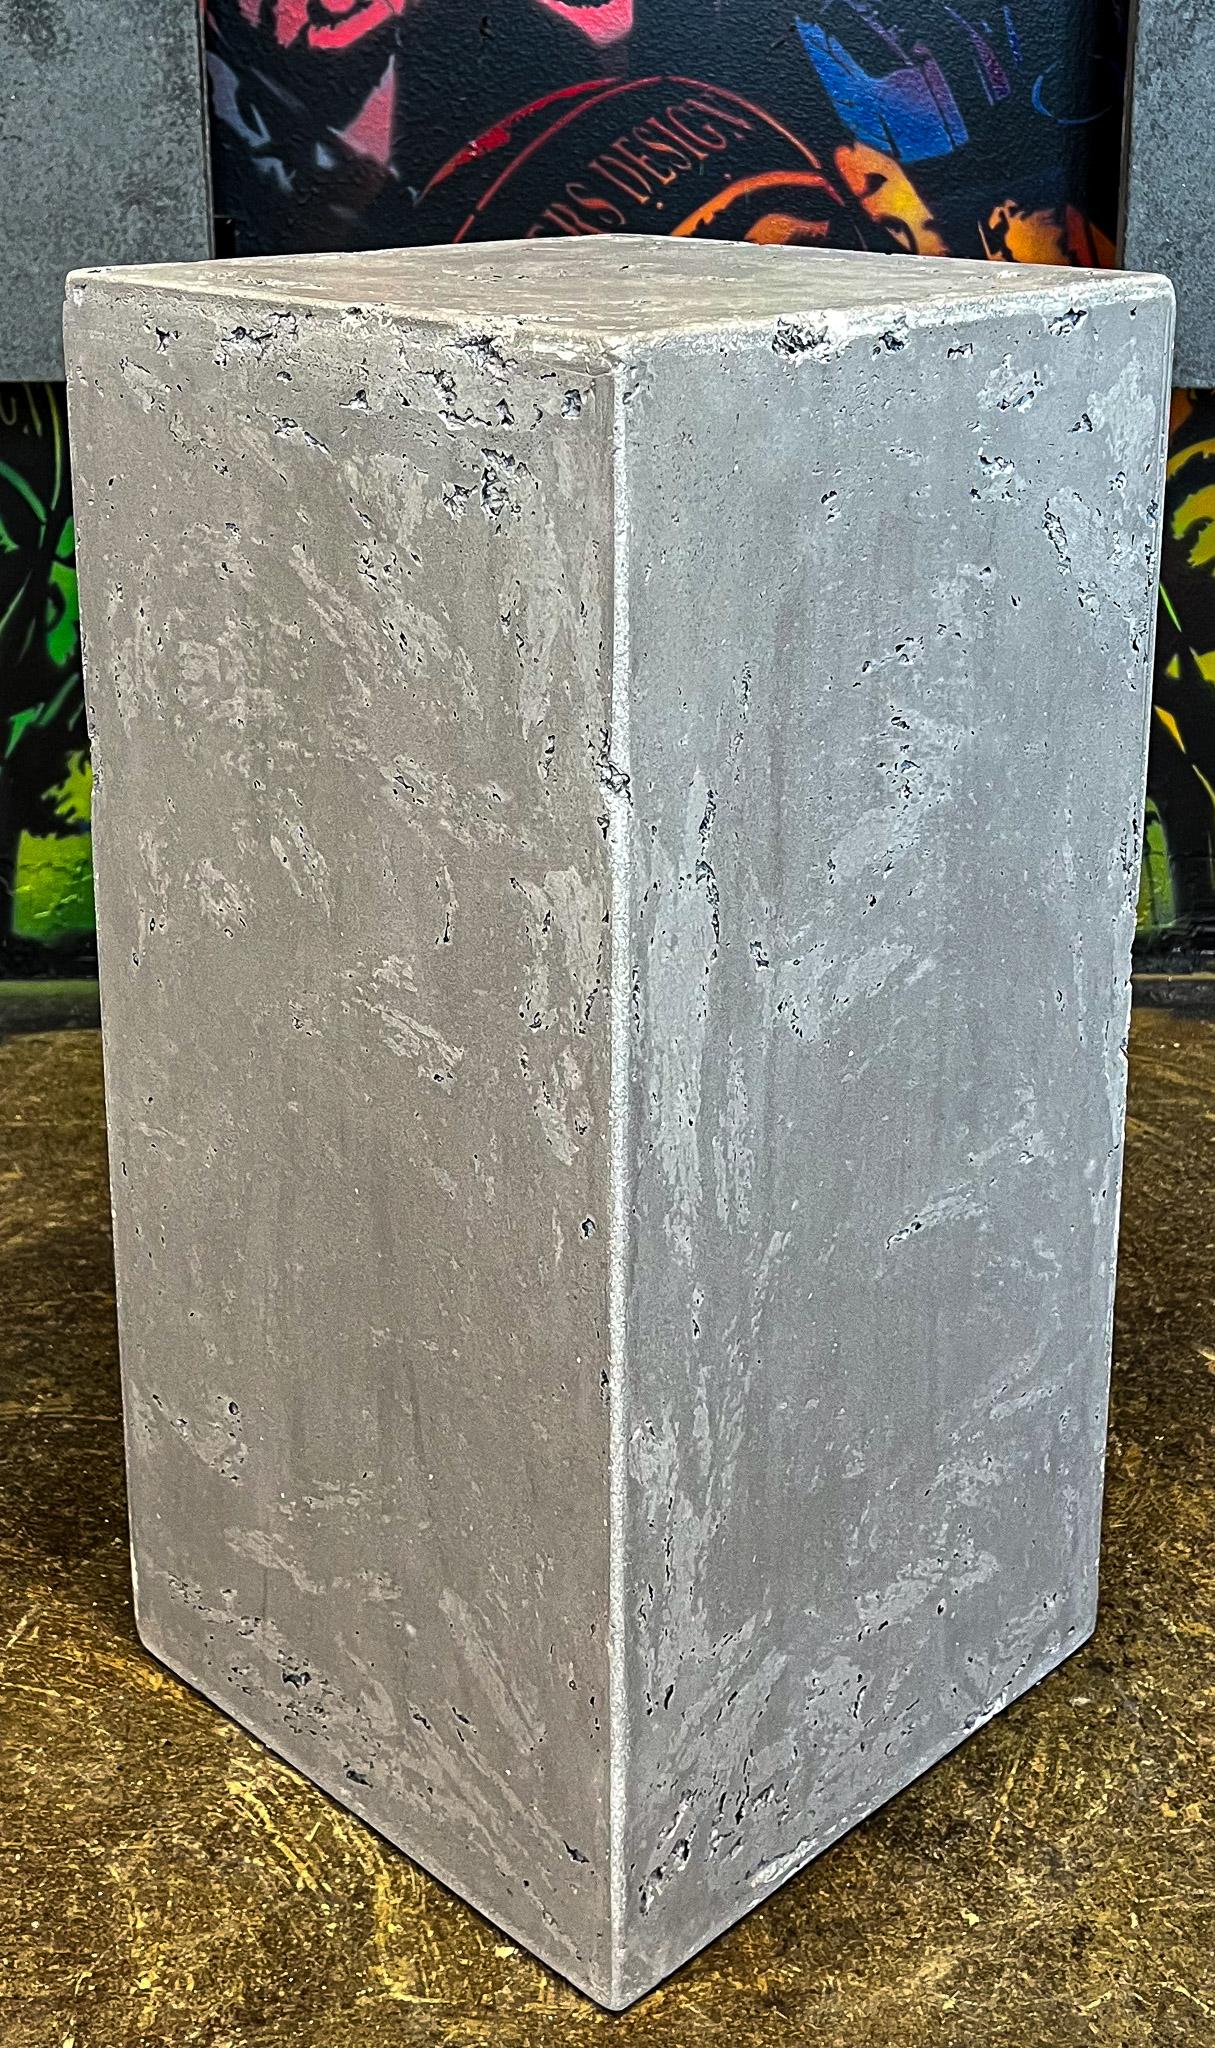 Elevate your decor with our Line RAW CONCRETE, a one-of-a-kind masterpiece that will elevate any space. Though uniform in size and color, the unique texture and stunning imperfections, such as strike marks and other details, make each cylinder truly